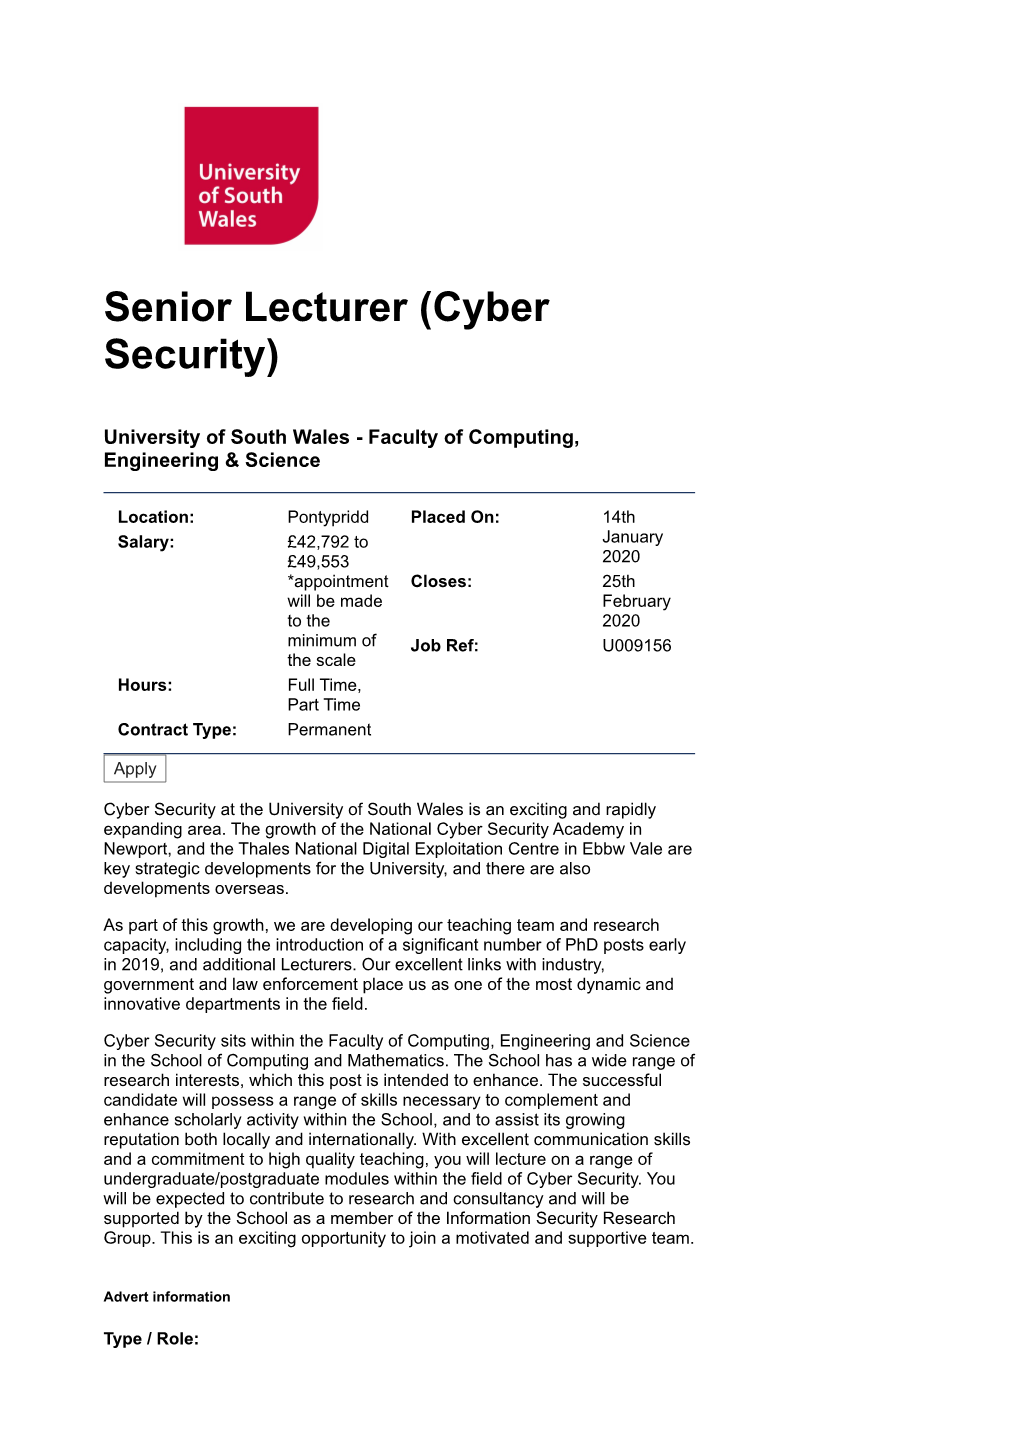 Senior Lecturer (Cyber Security)